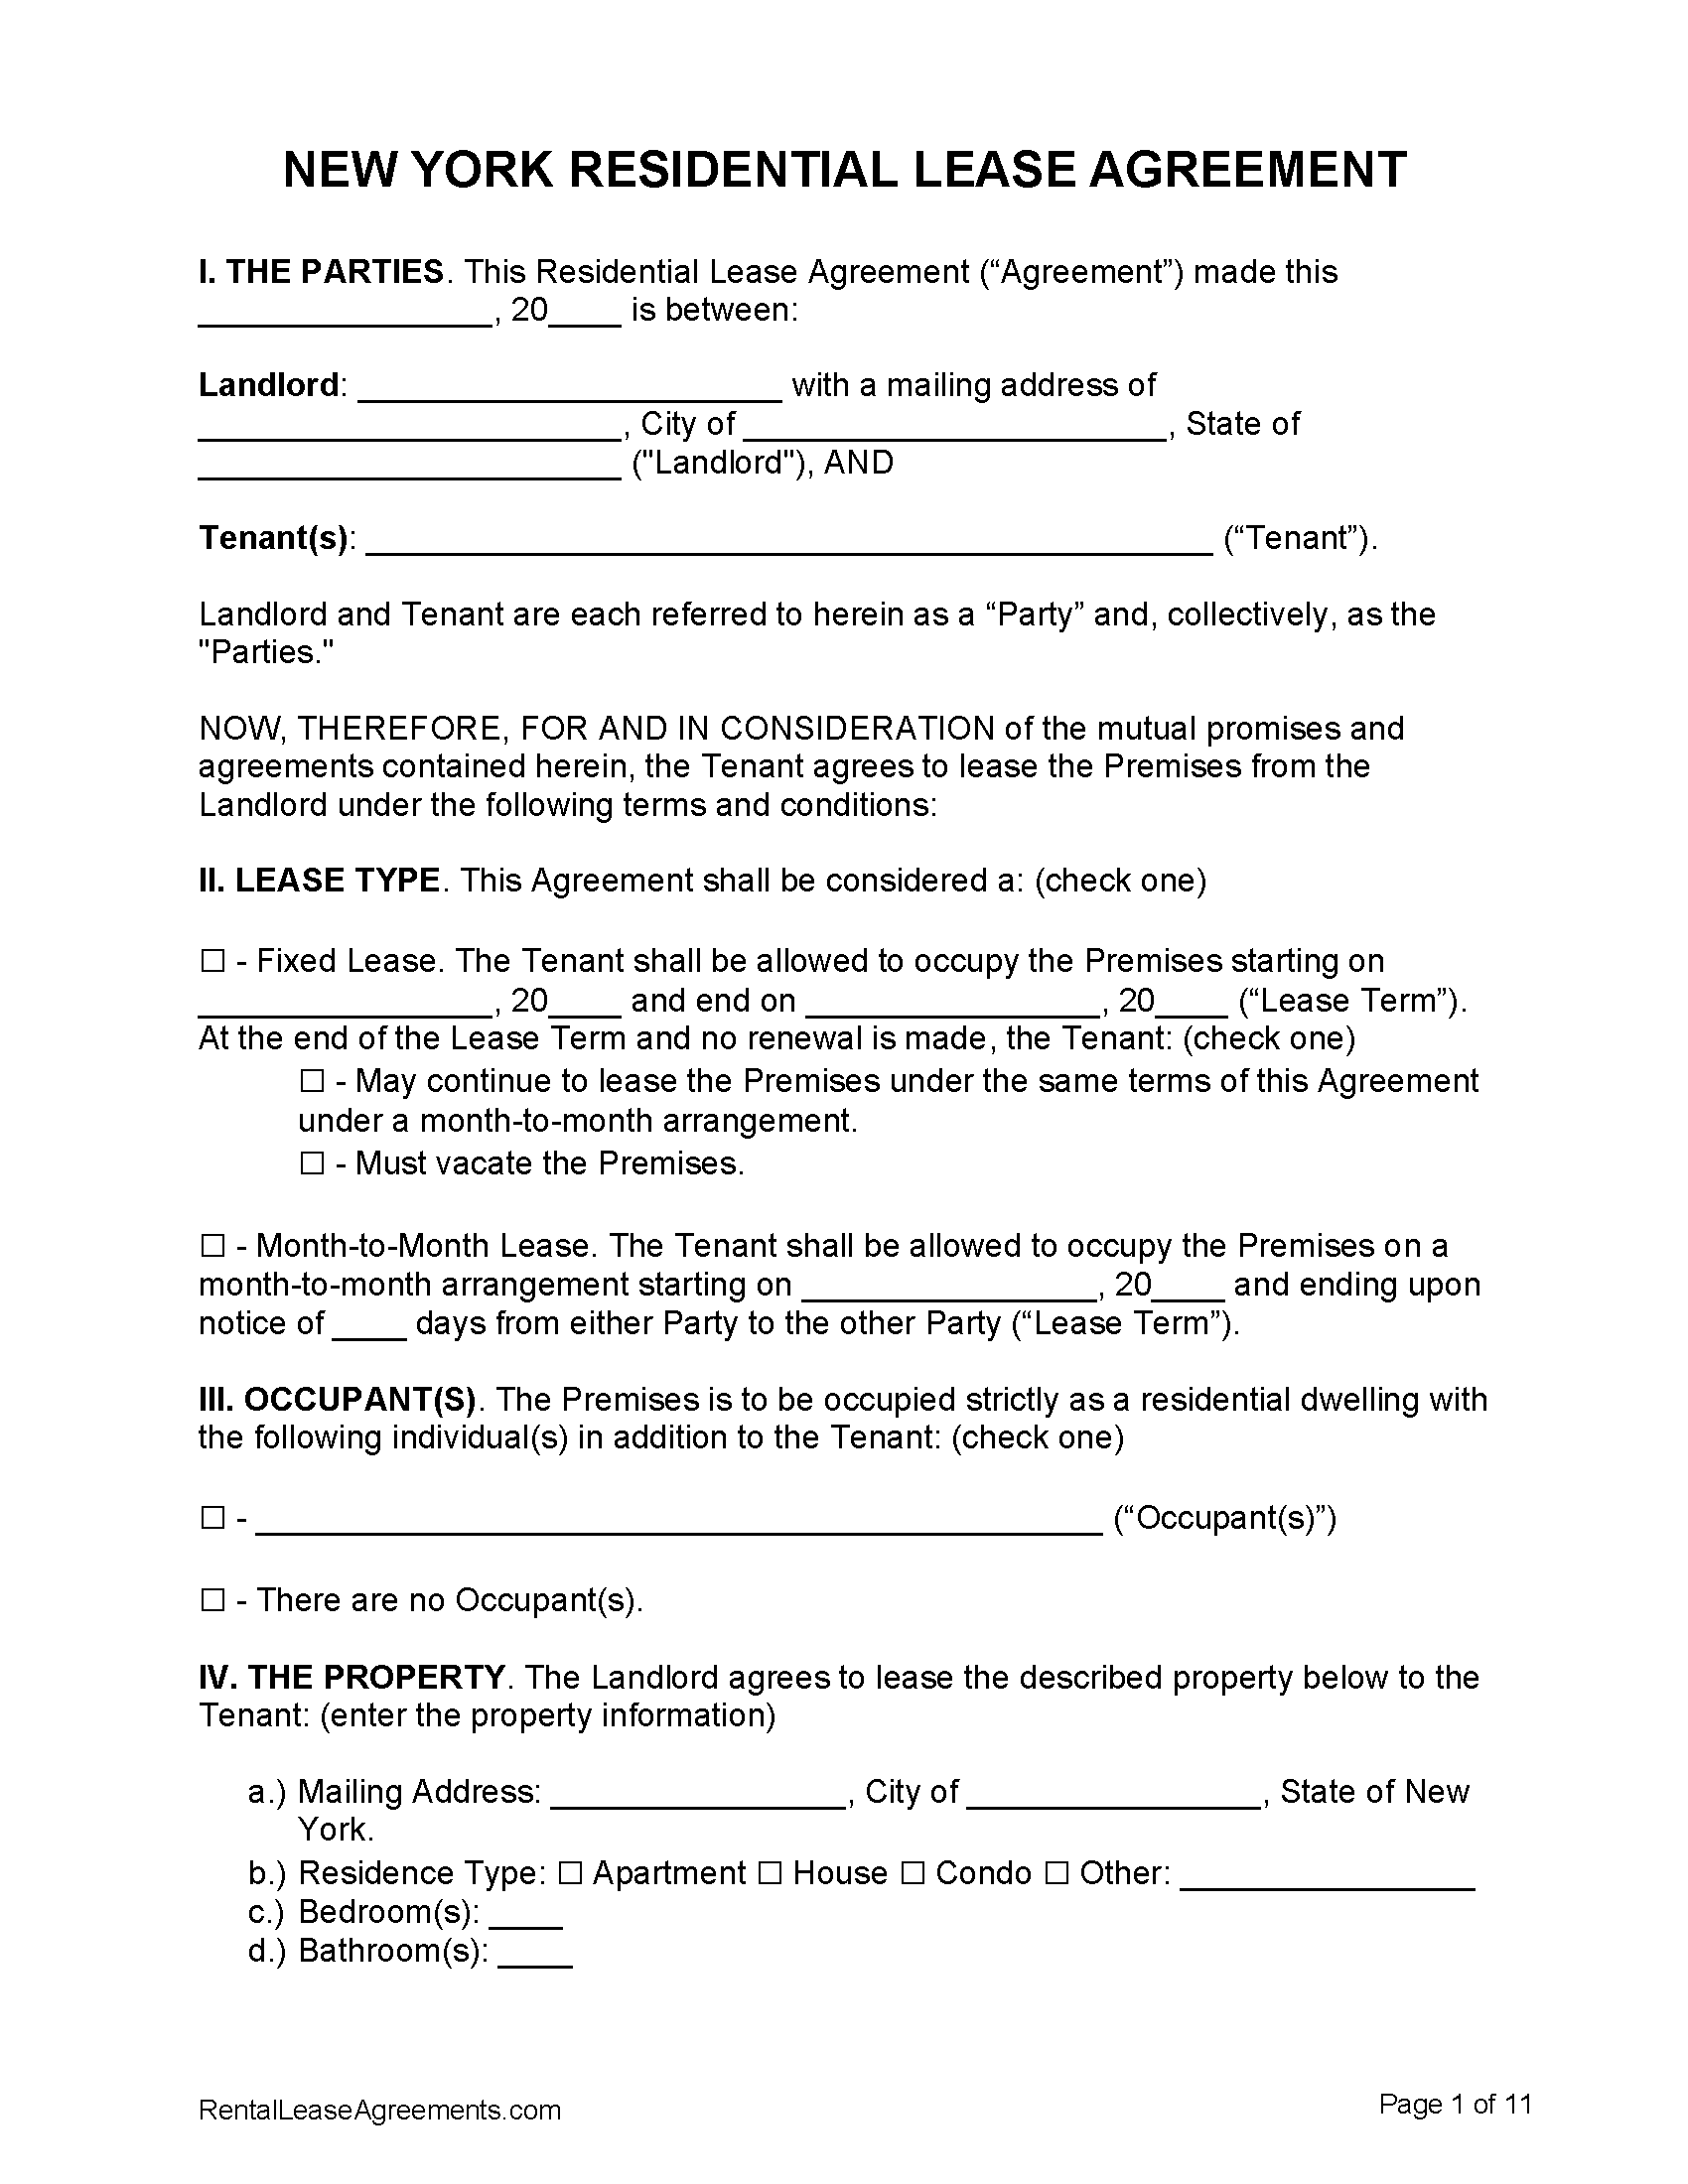 Free New York Residential Lease Agreement  PDF - MS Word In free printable residential lease agreement template